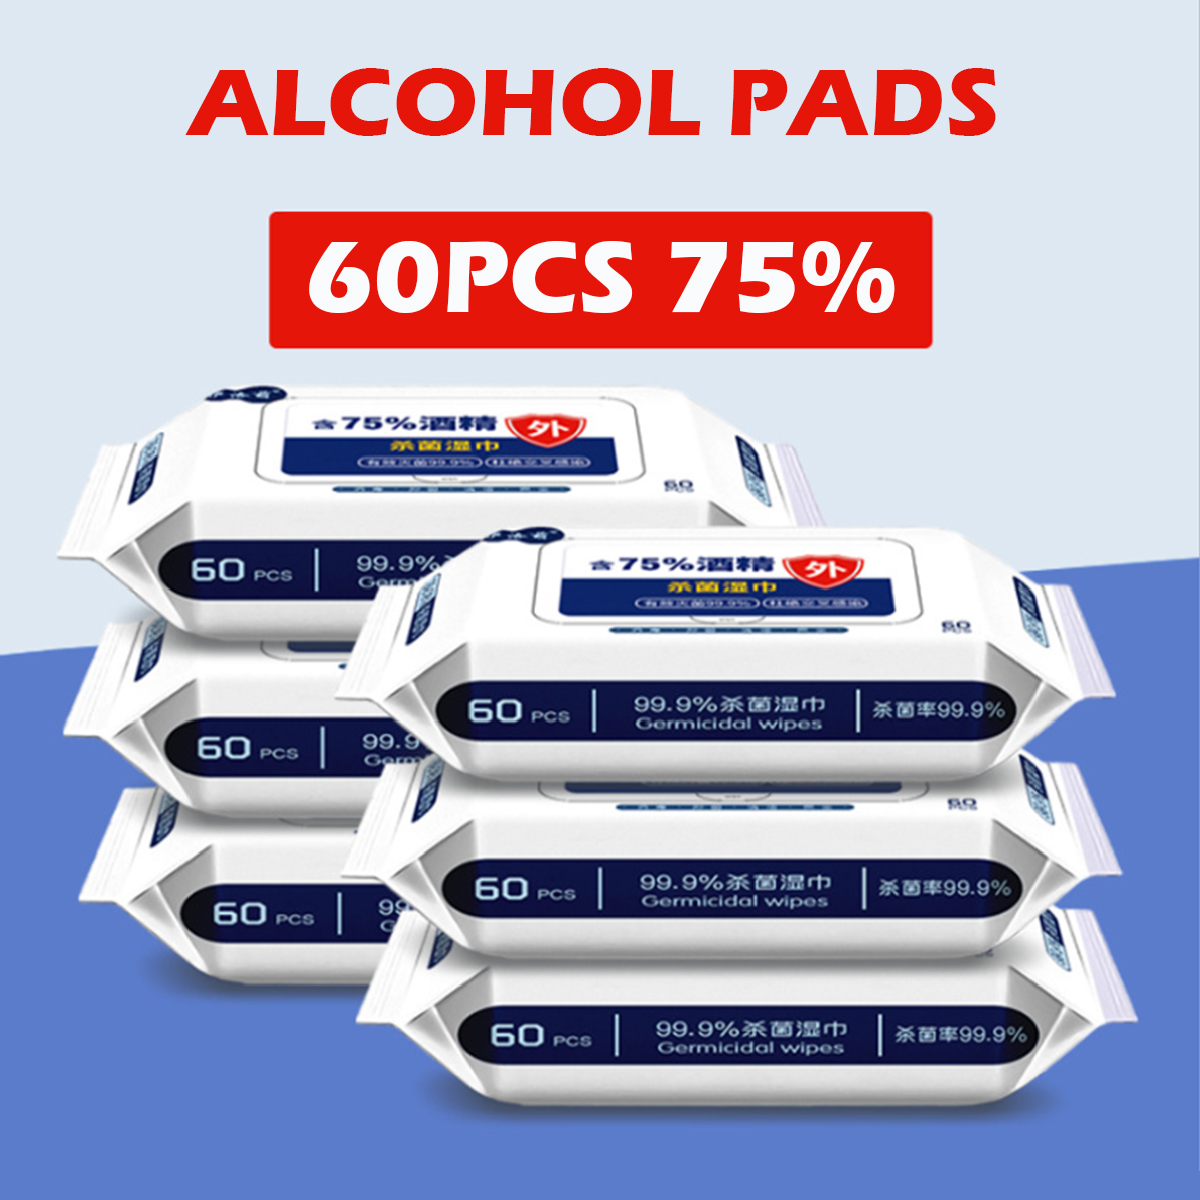 1-Pack-of-60Pcs-75-Alcohol-Disinfecting-Wipes-Disinfection-Cleaning-Wet-Wipes-Used-for-Skin-Watch-Cl-1673697-1